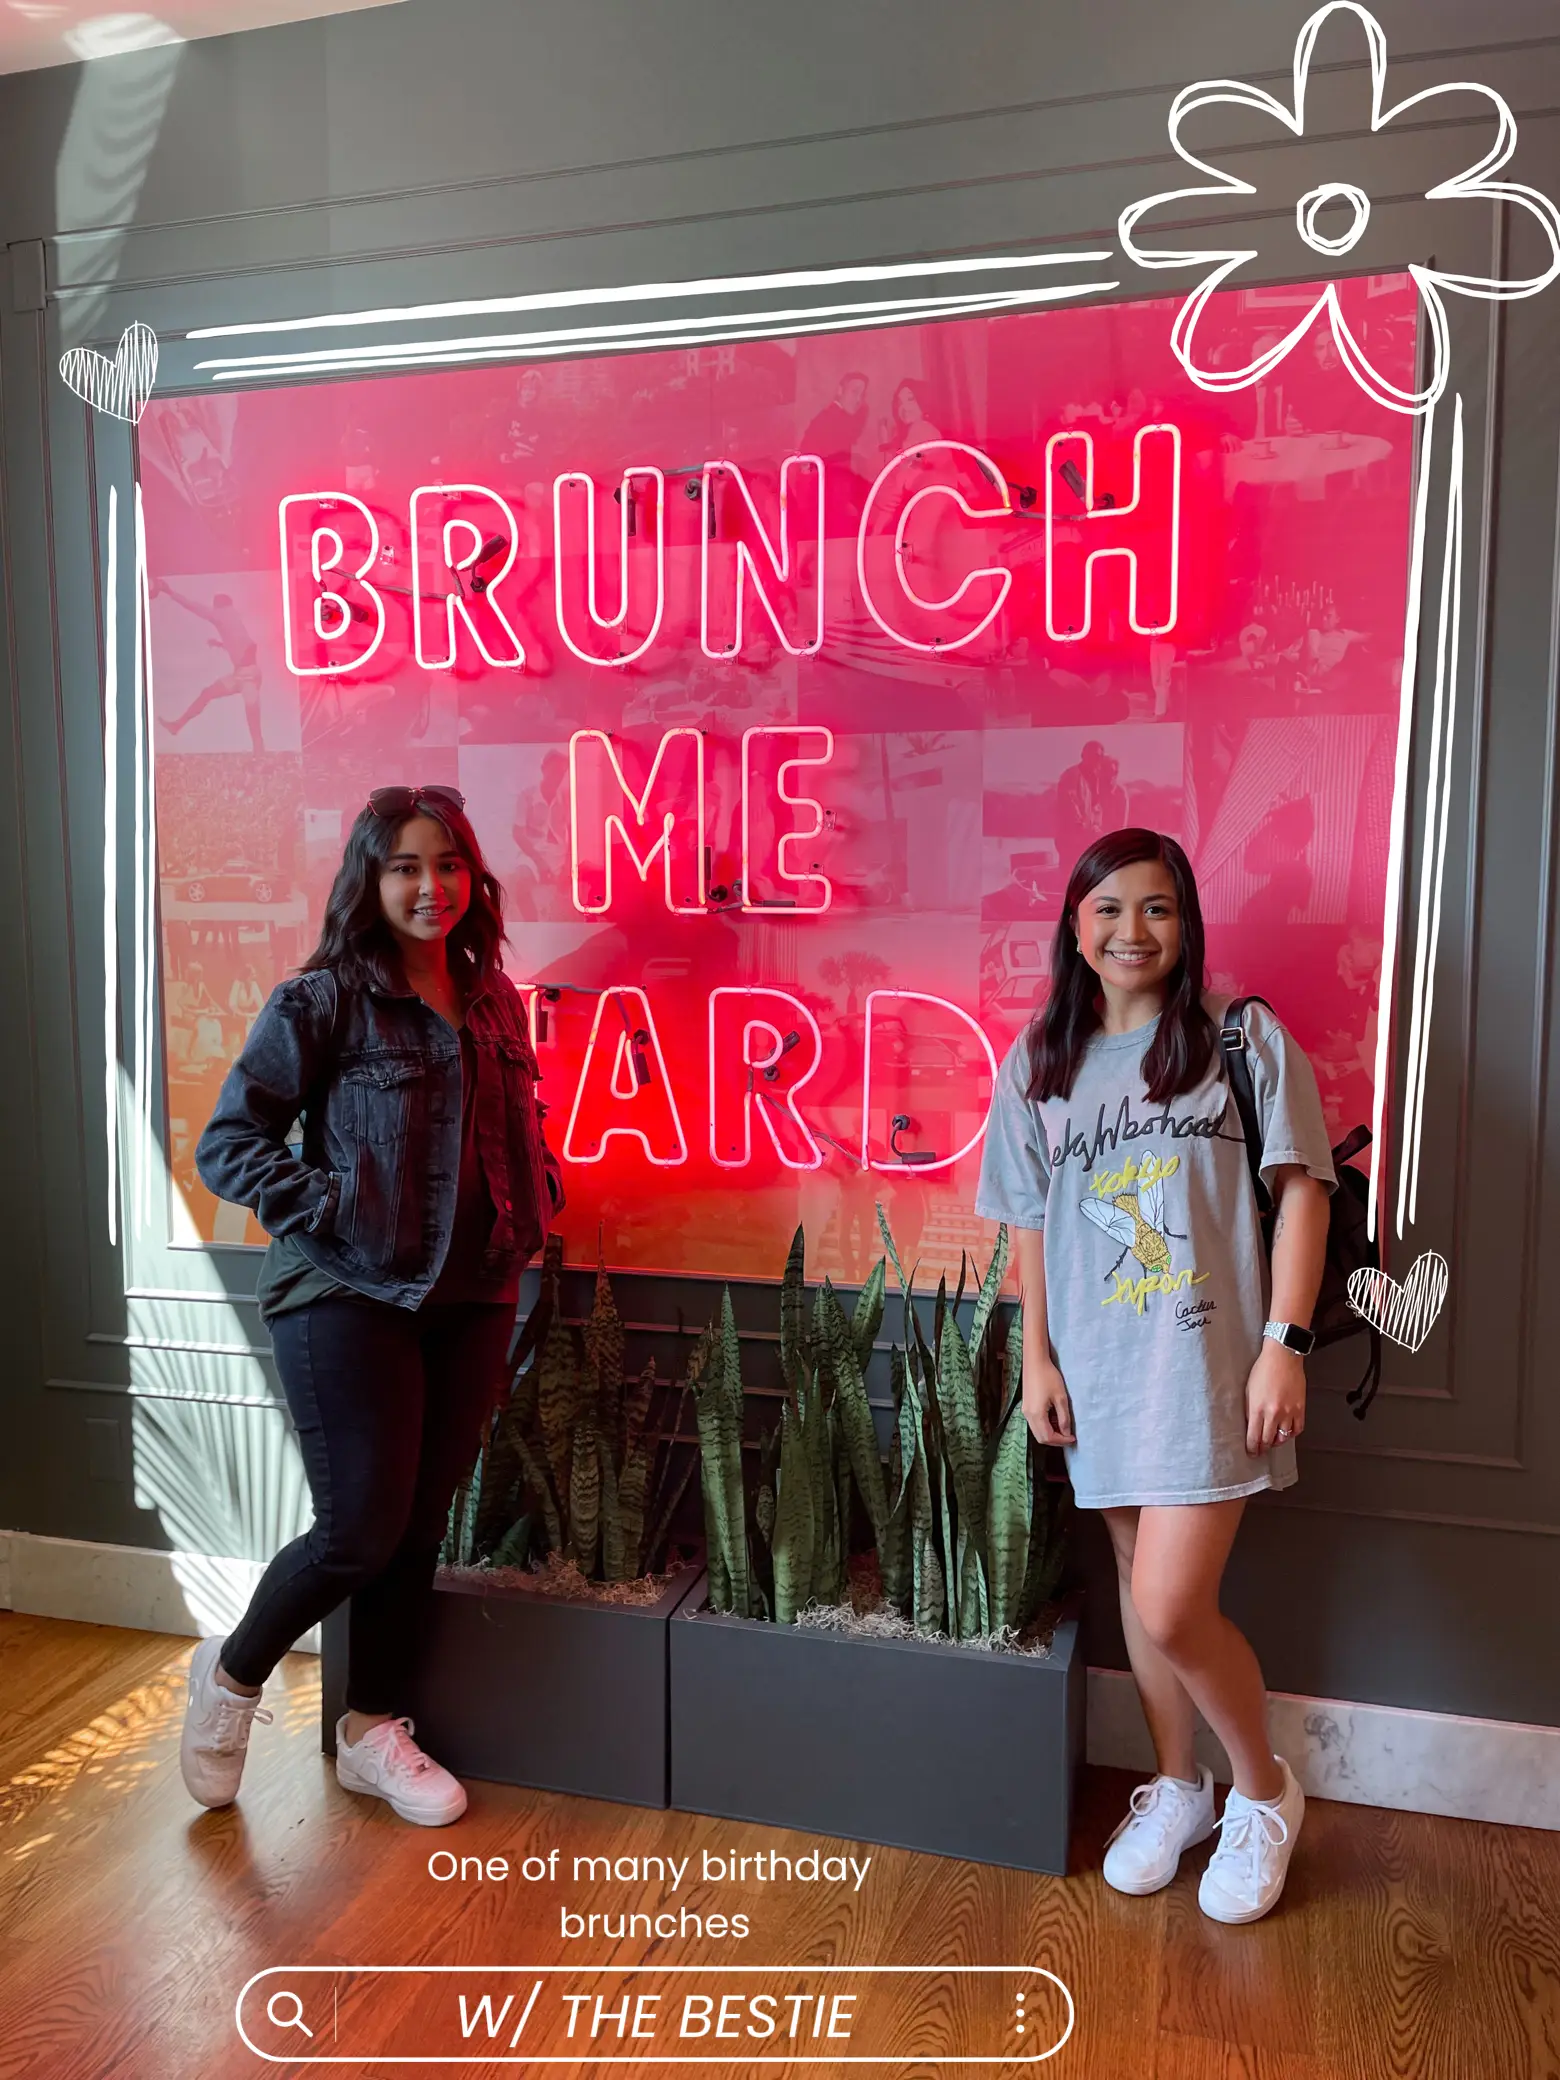  Two women are standing in front of a neon sign that says "Brunch Me".